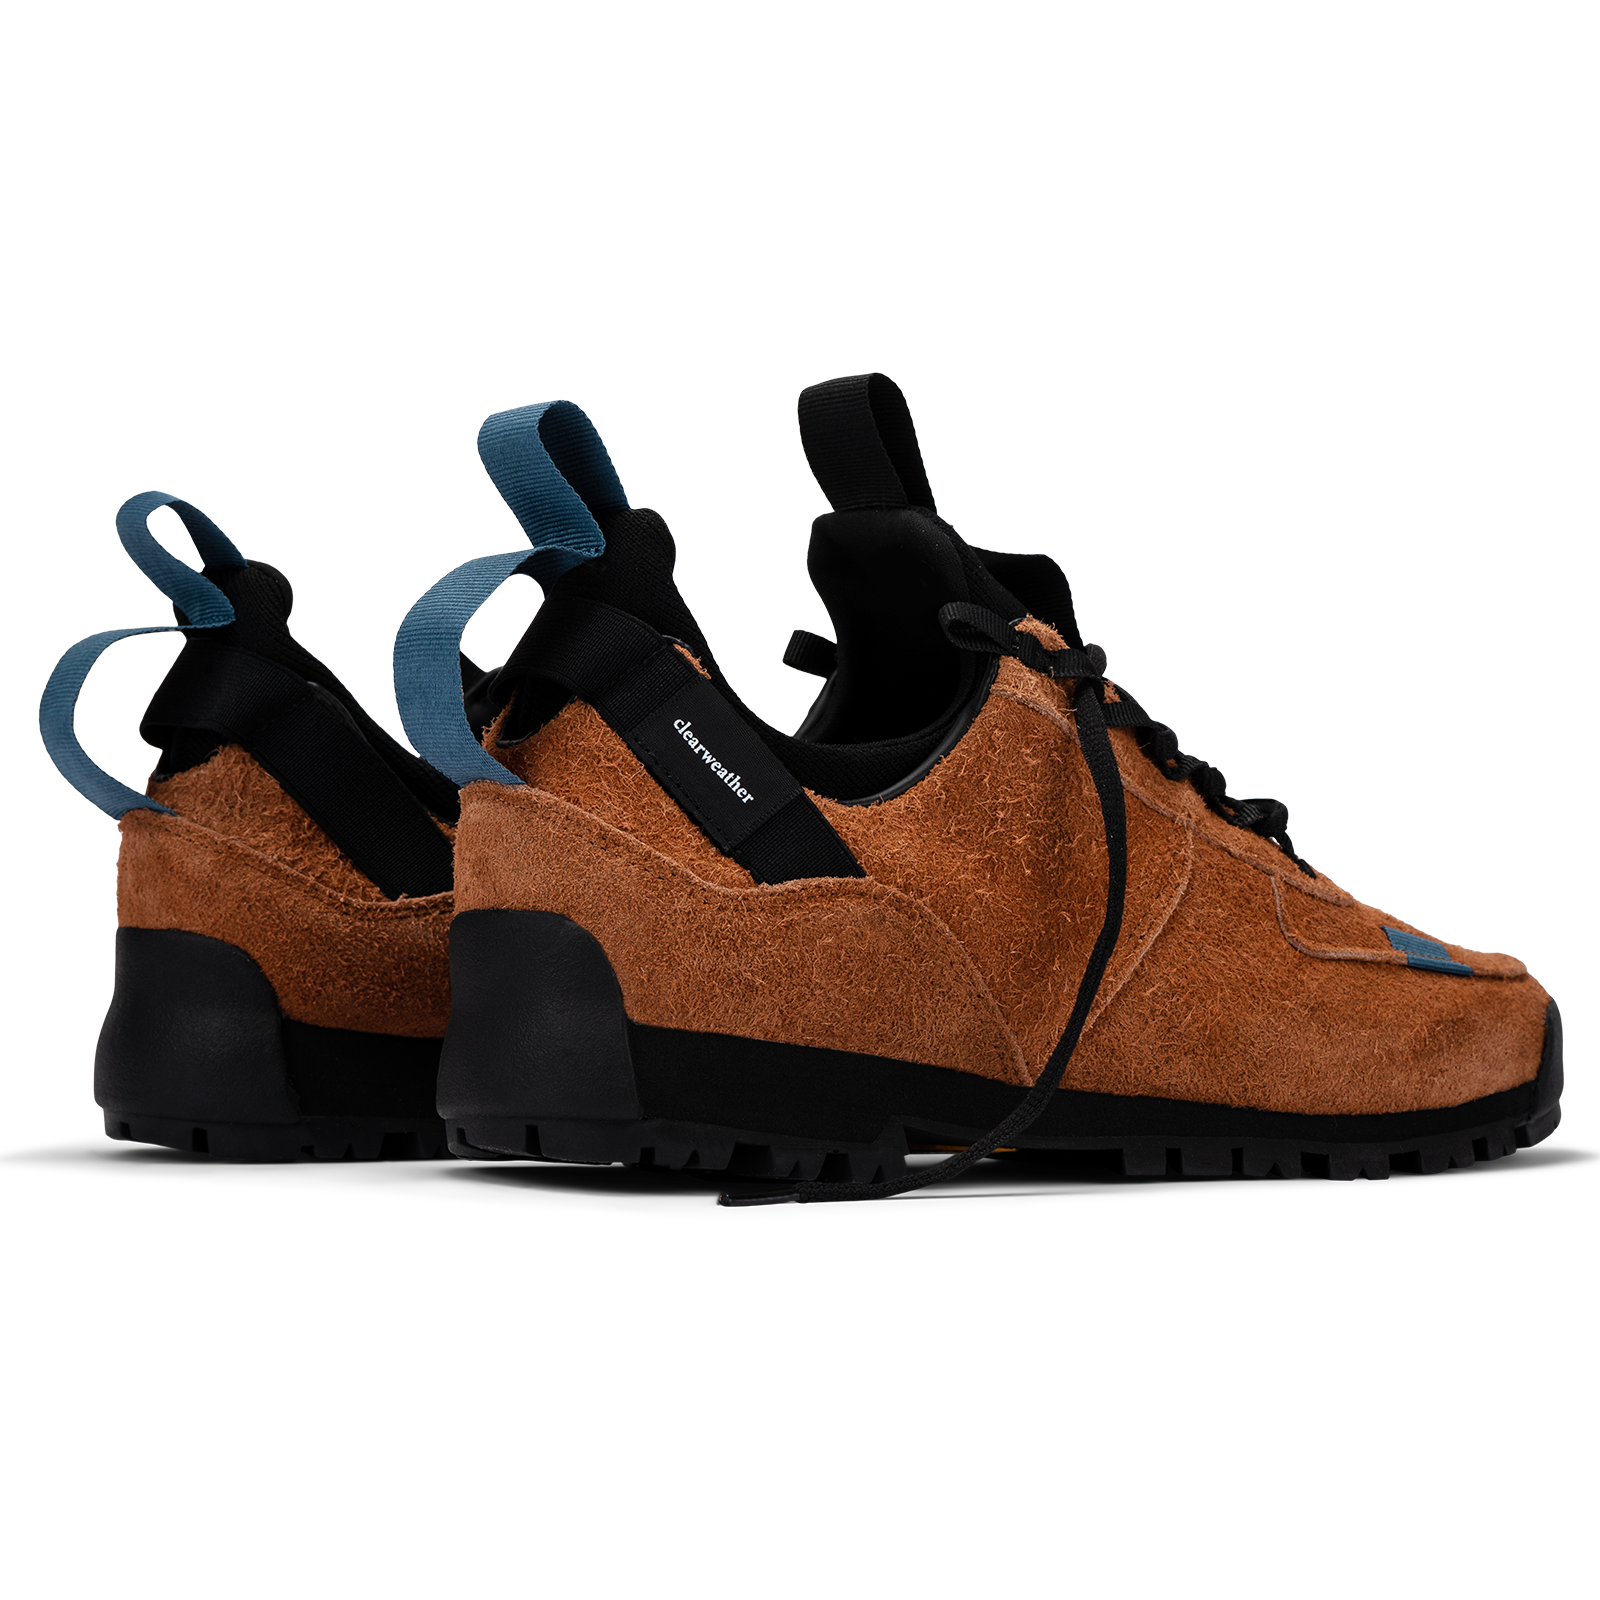 back 3/4 view  / Approach / Auburn color features tabaco colored hairy suede upper, gross grain webbing for laces. helastic heel detail, stretch mesh internal bootie, vintrage vibram hiking outsole and eva midsole. 